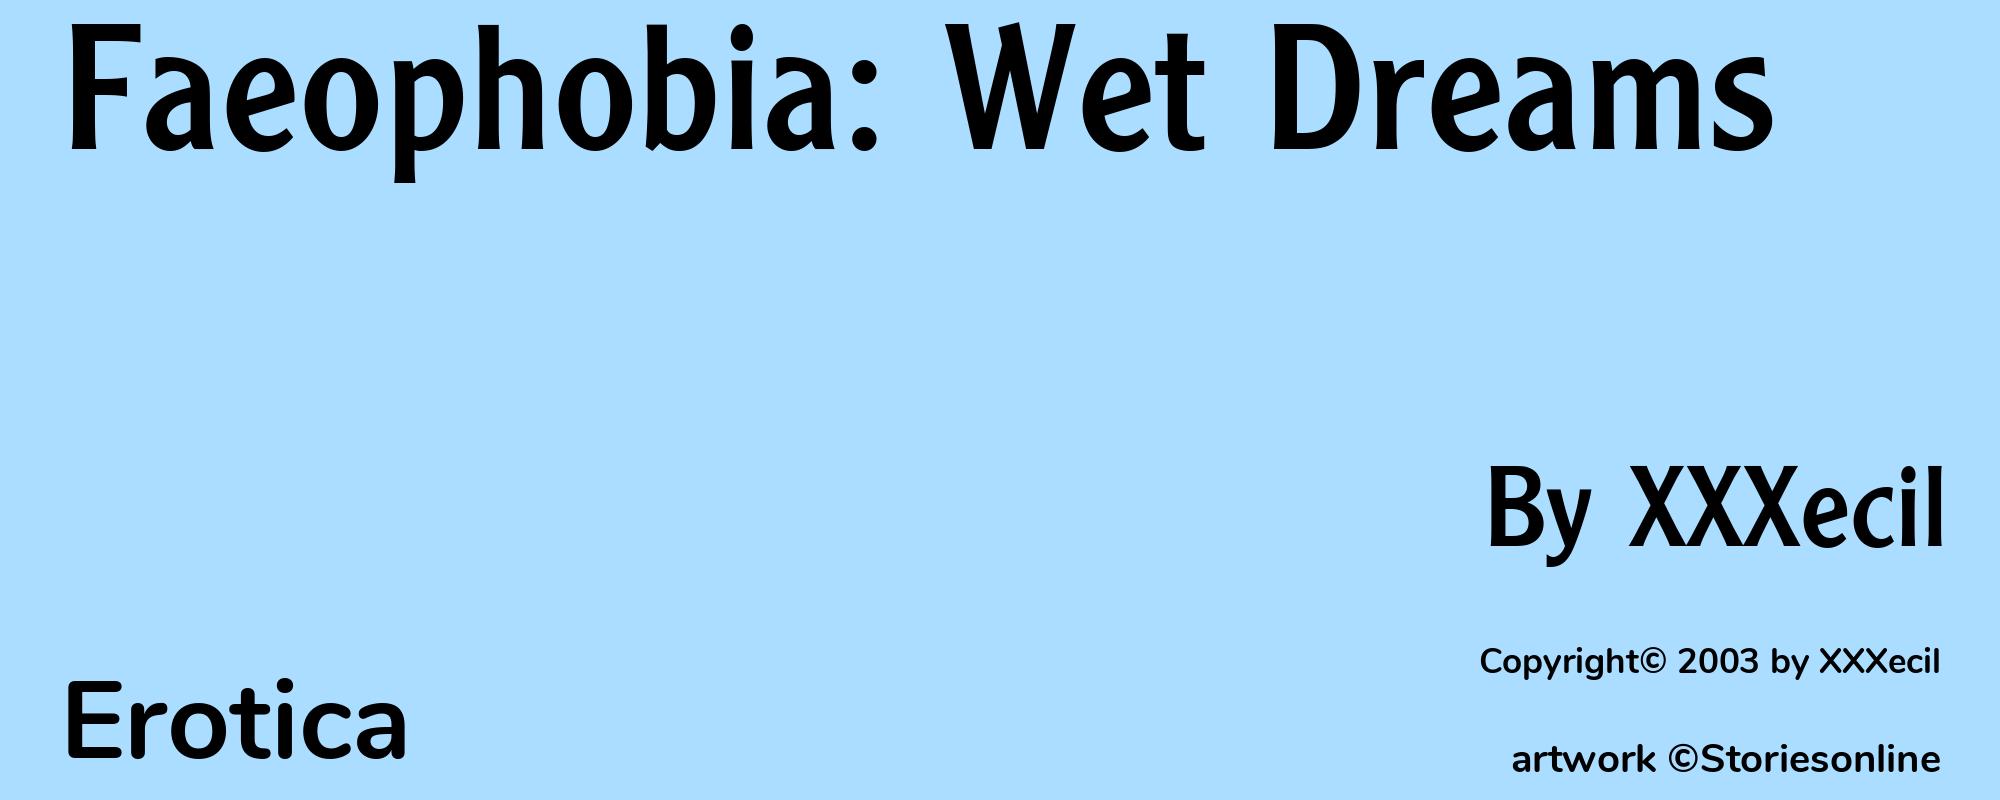 Faeophobia: Wet Dreams - Cover